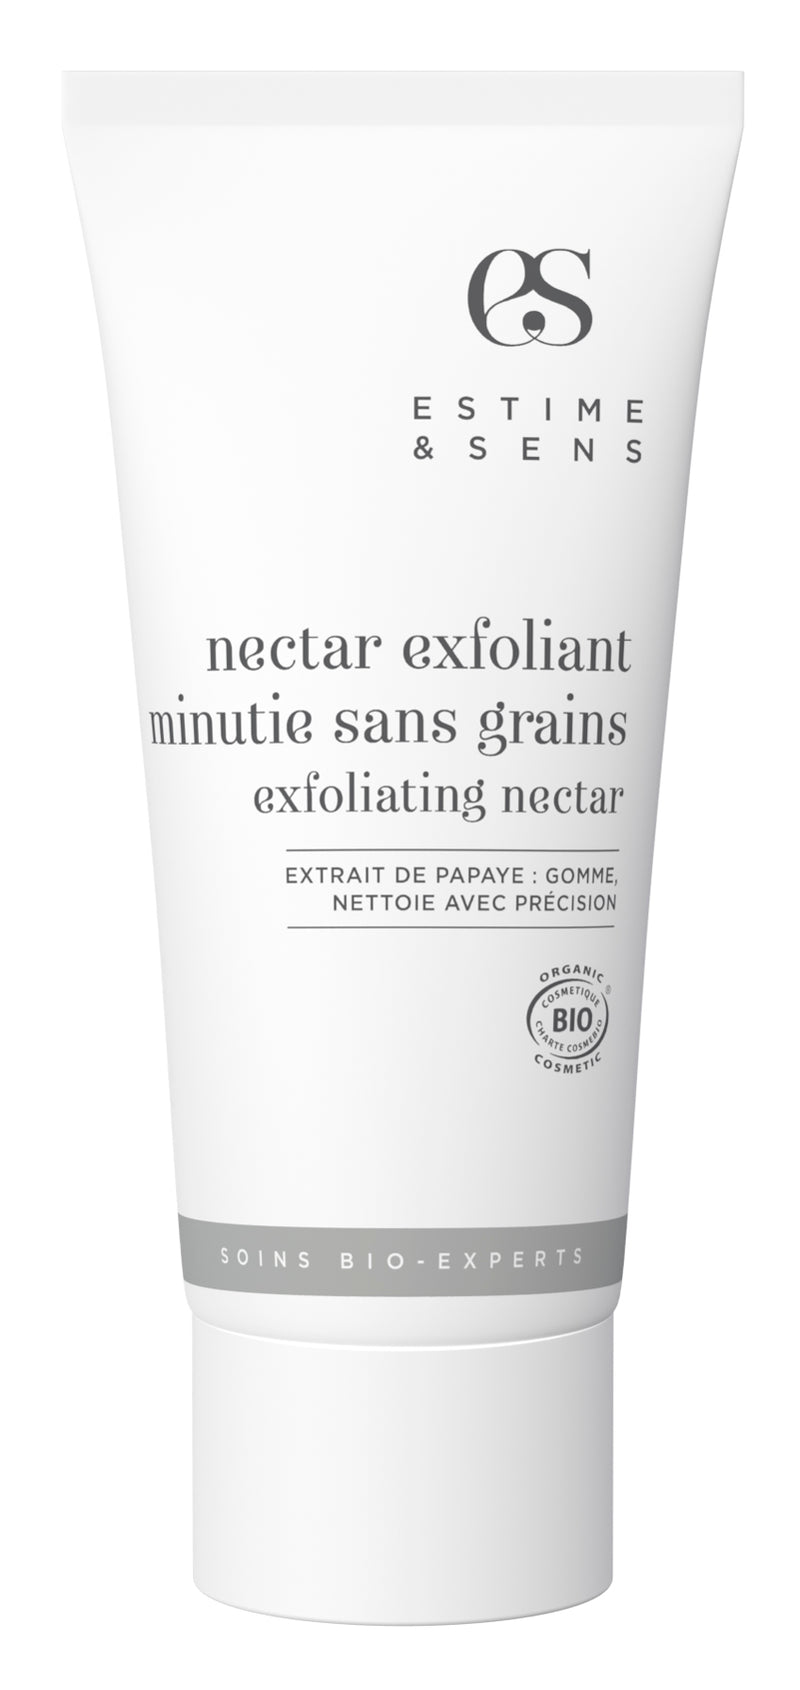 Exfoliating Nectar without grains meticulousness